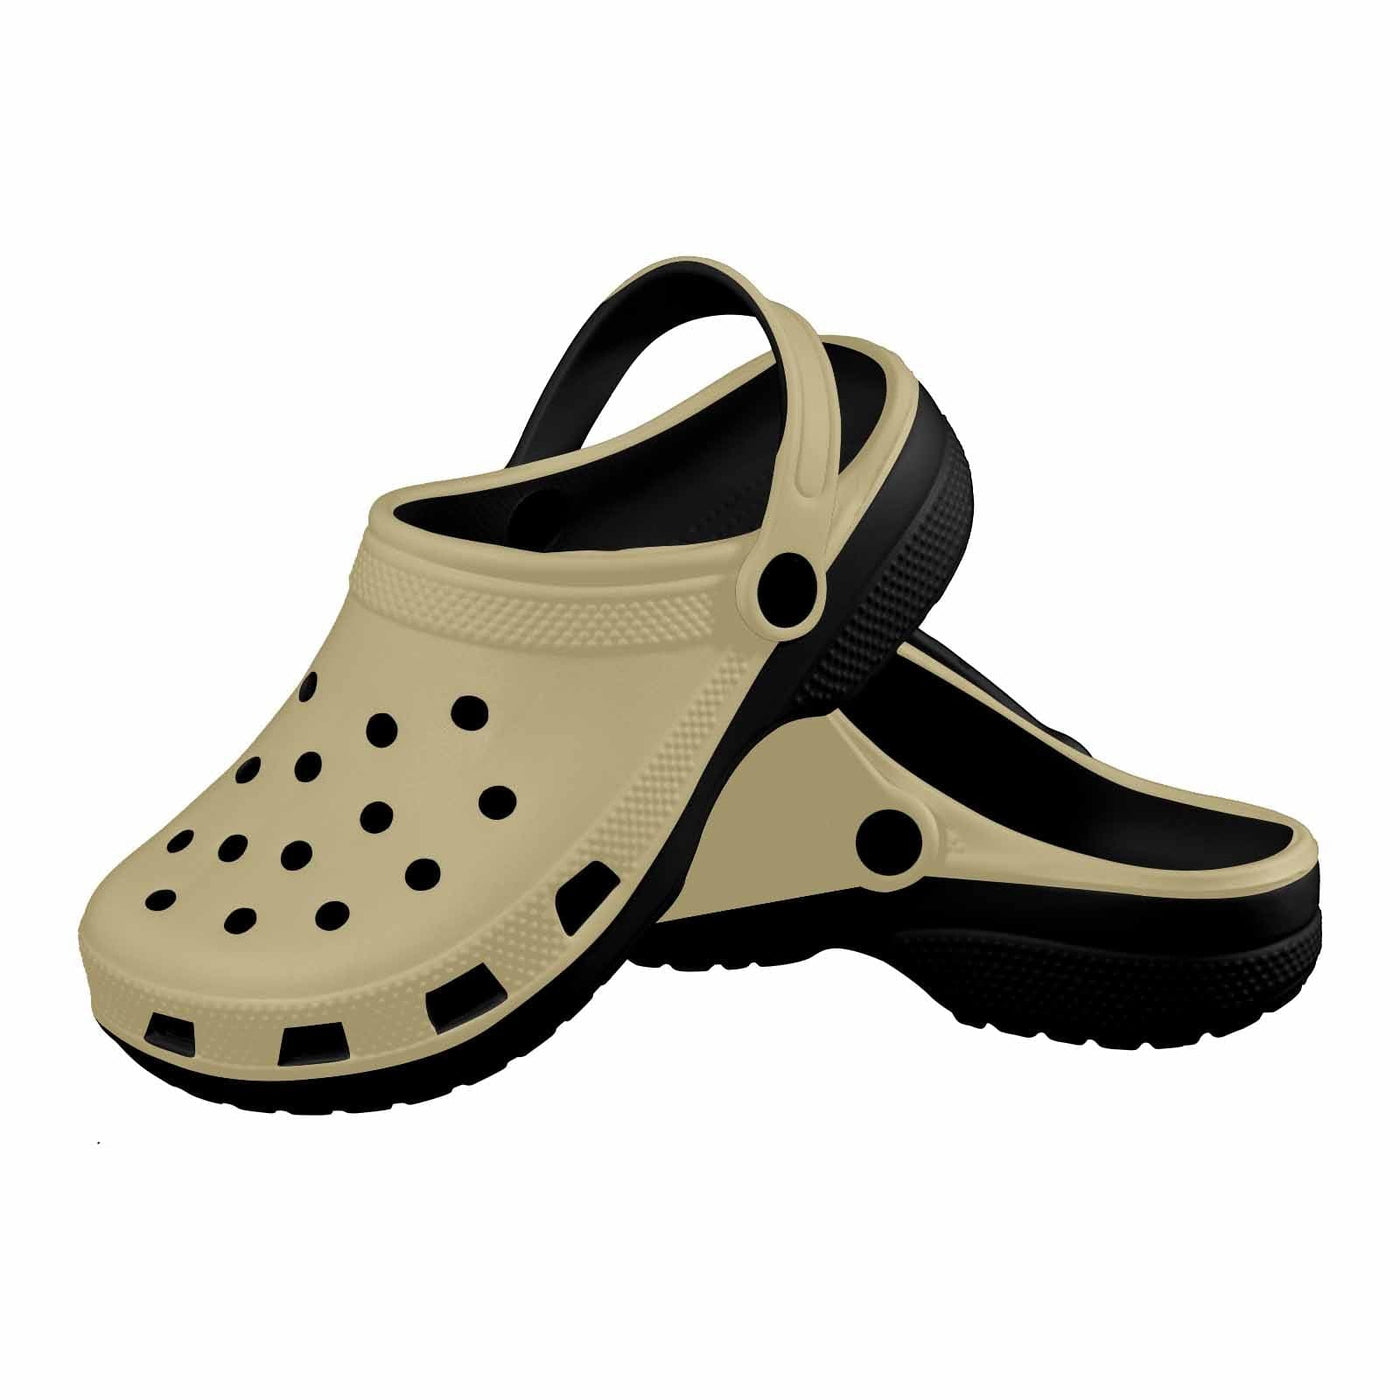 Sand Dollar Brown Adult Clogs - Unisex | Clogs | Adults